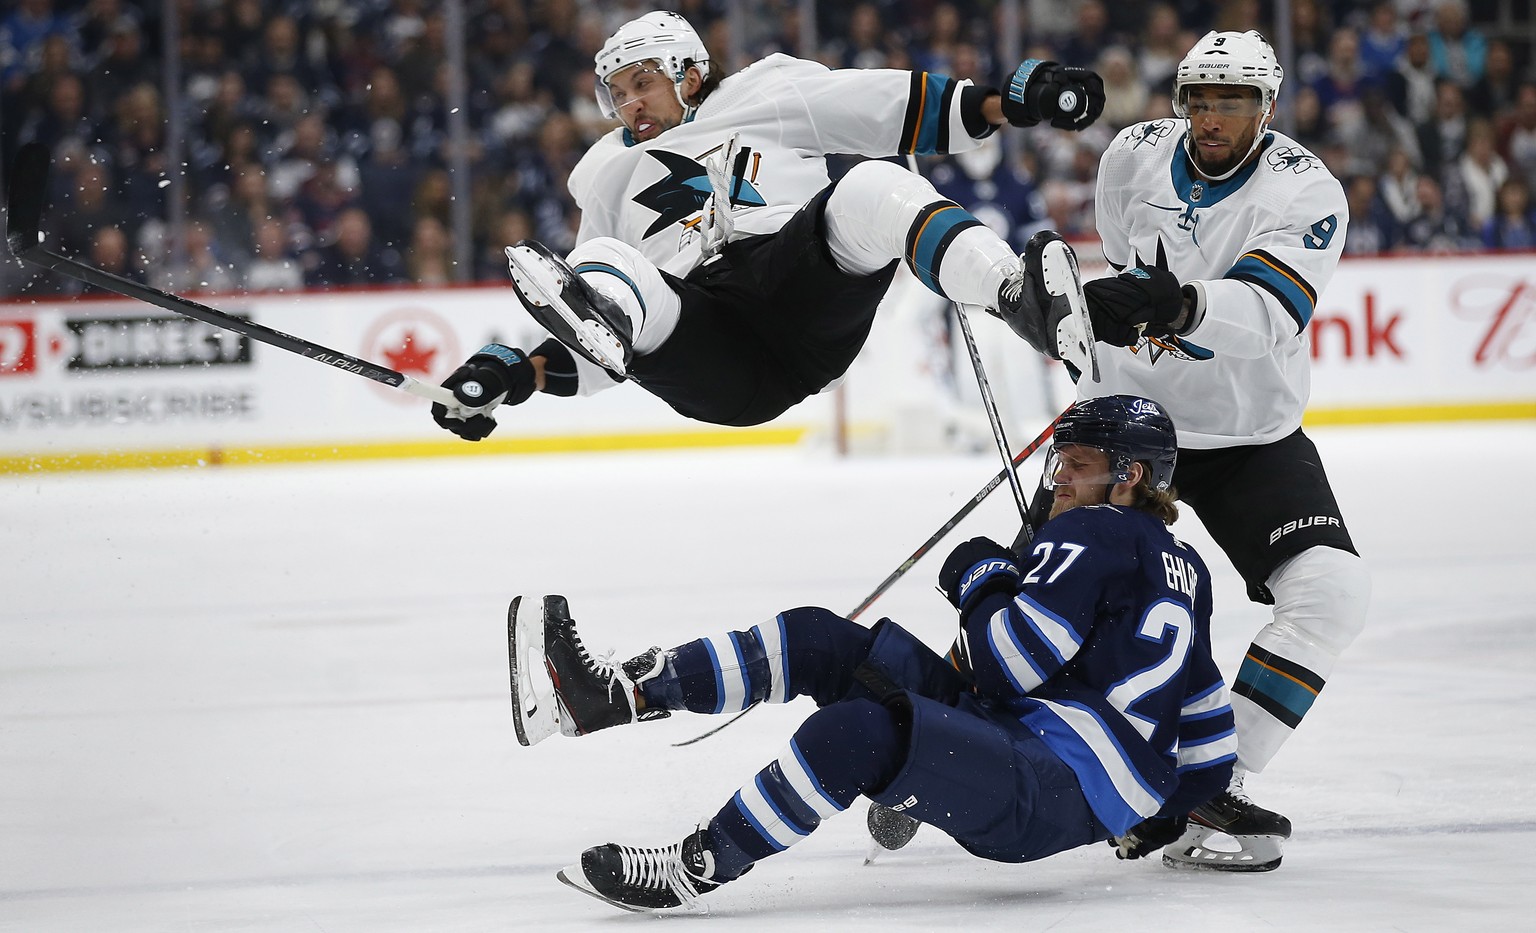 Winnipeg Jets&#039; Nikolaj Ehlers (27) and San Jose Sharks&#039; Brenden Dillon (4) collide as Sharks&#039; Evander Kane (9) skates by during the second period of an NHL hockey game Friday, Feb. 14,  ...